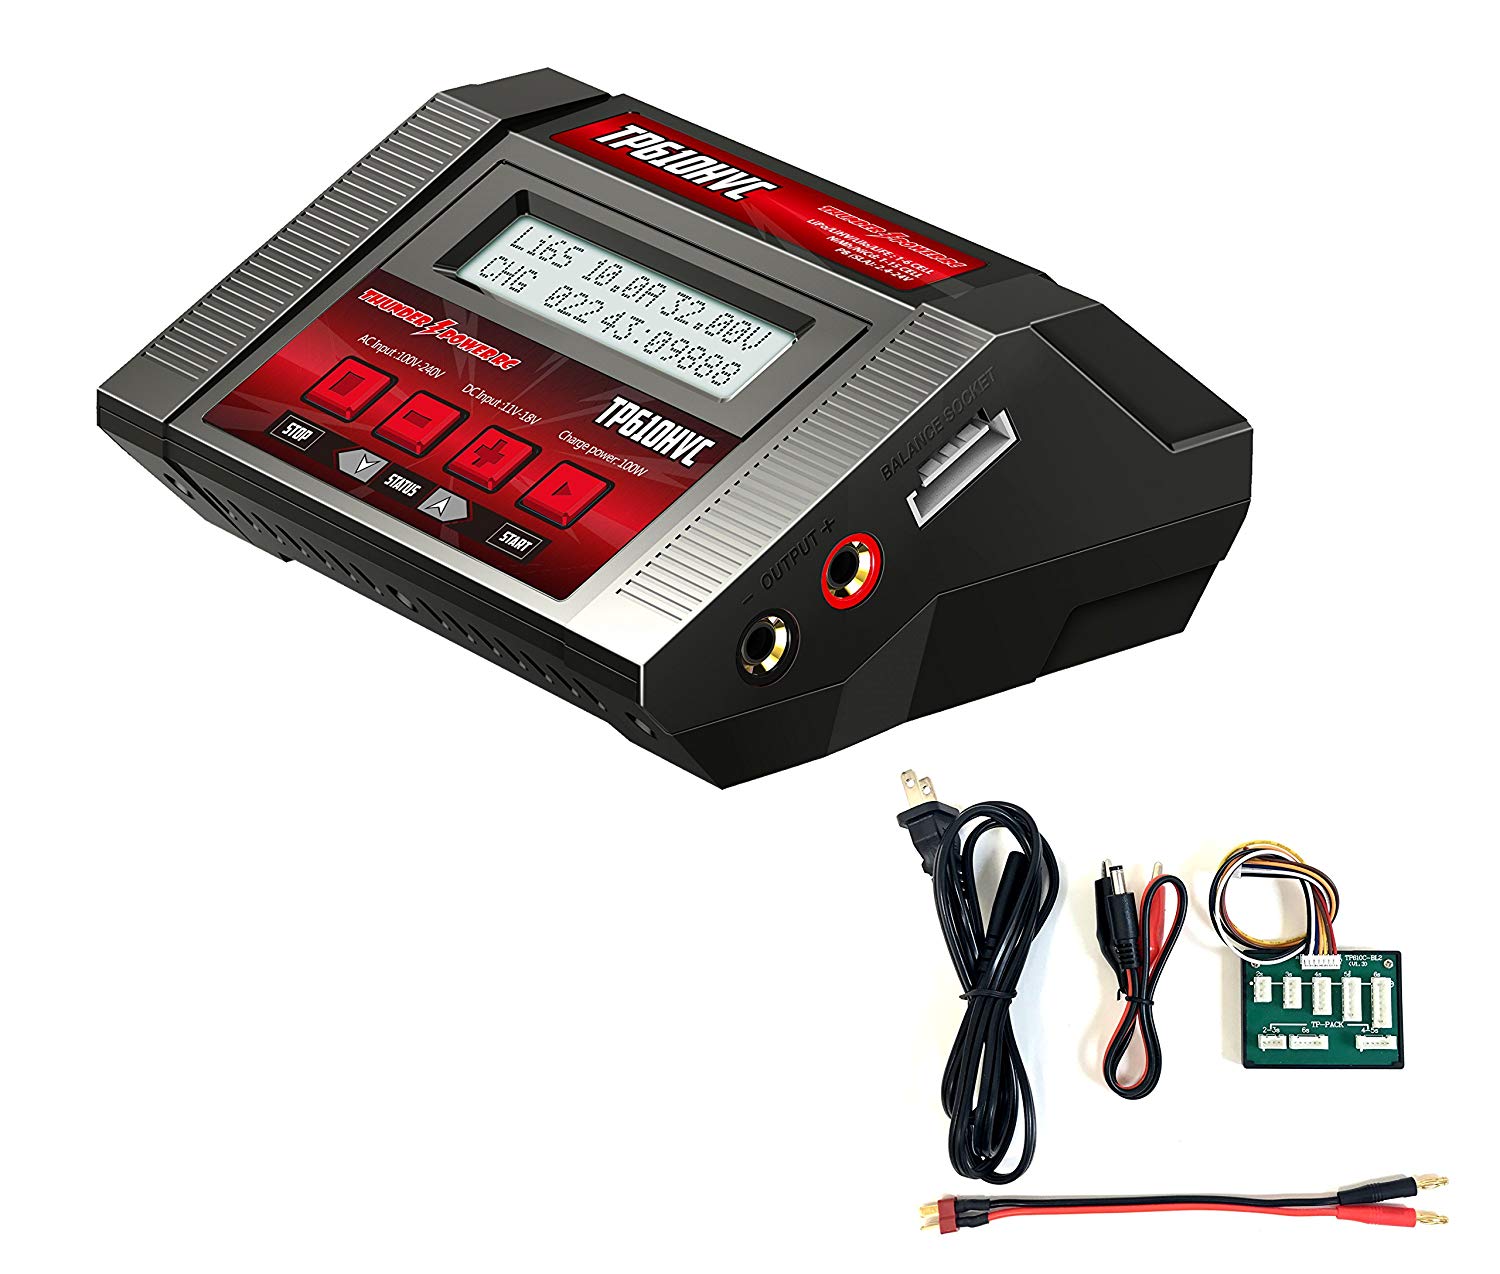 Thunder Power RC 10a Multi Chemistry Lipo NiMH Charger Tp-610c for sale online